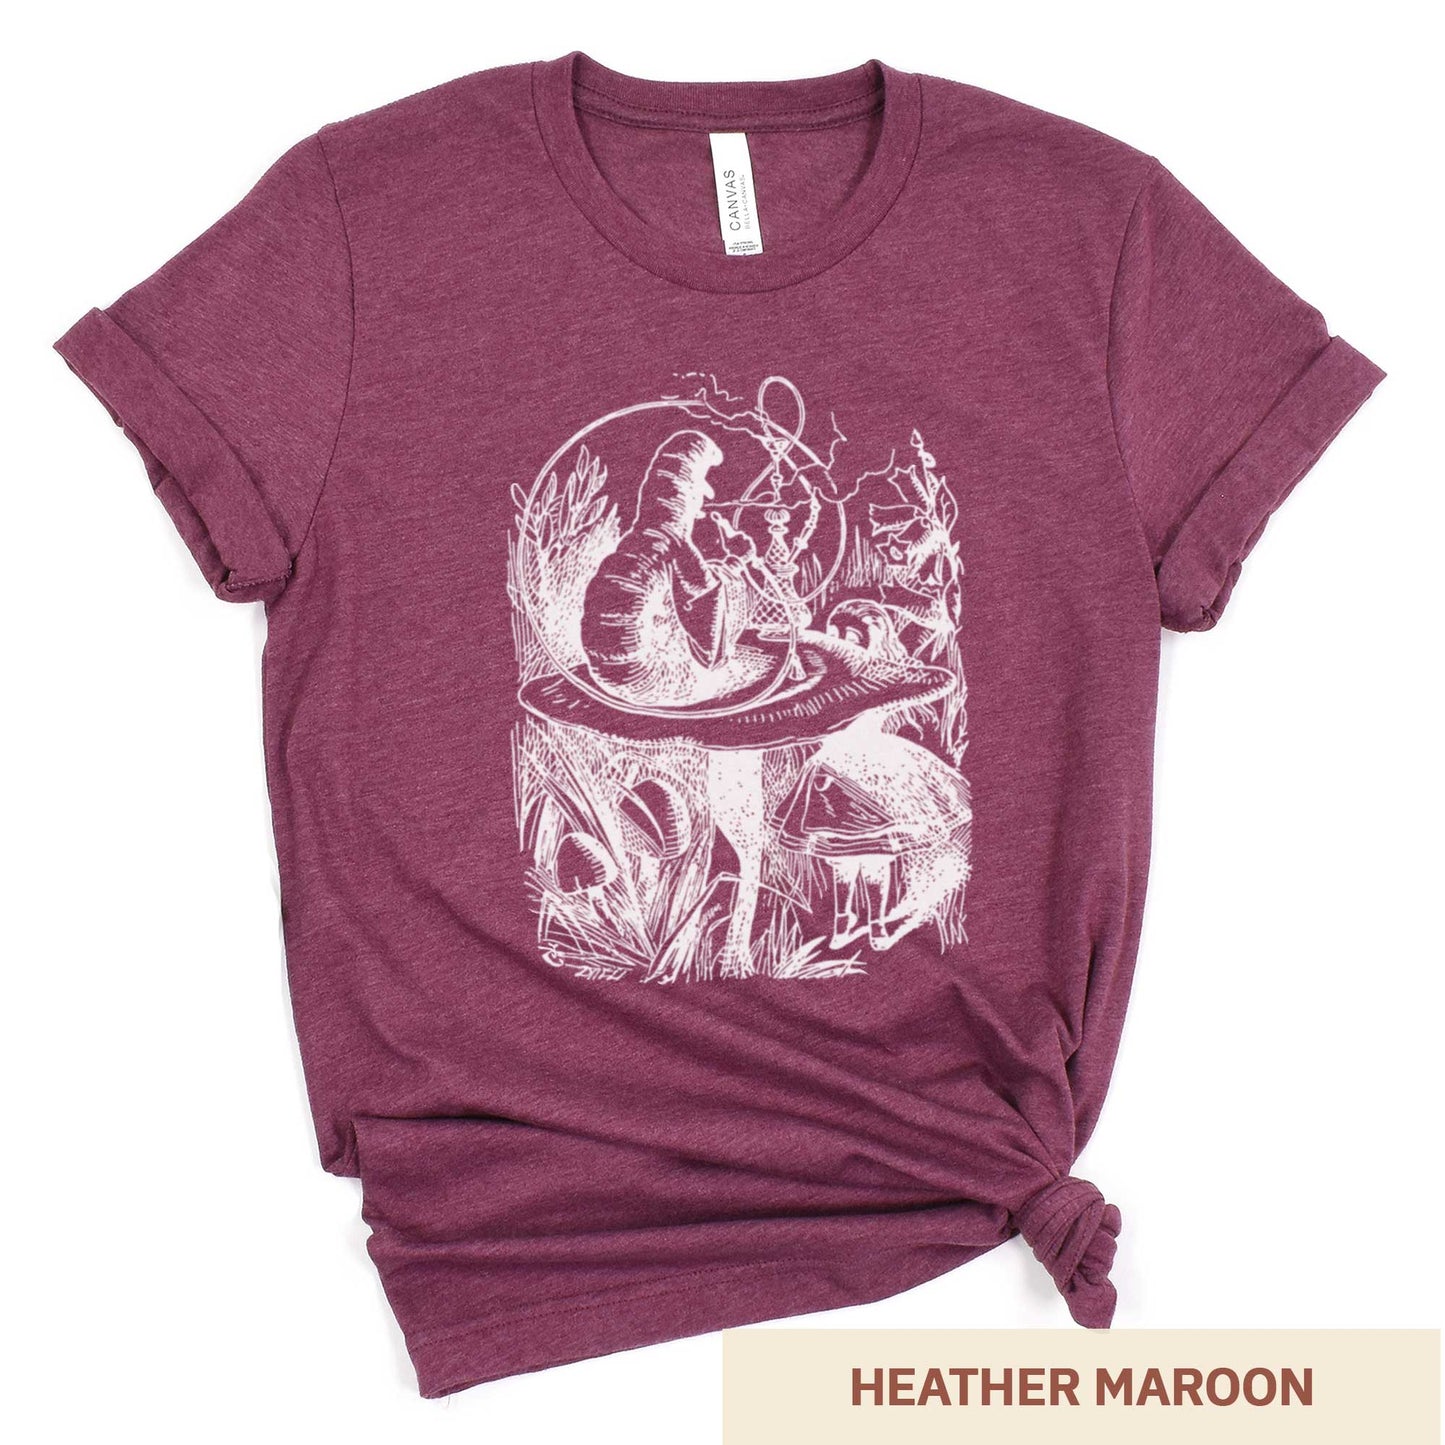 A heather maroon Bella Canvas t-shirt featuring the John Tenniel illustration of Alice in Wonderland meeting the caterpillar who is sitting on a mushroom.